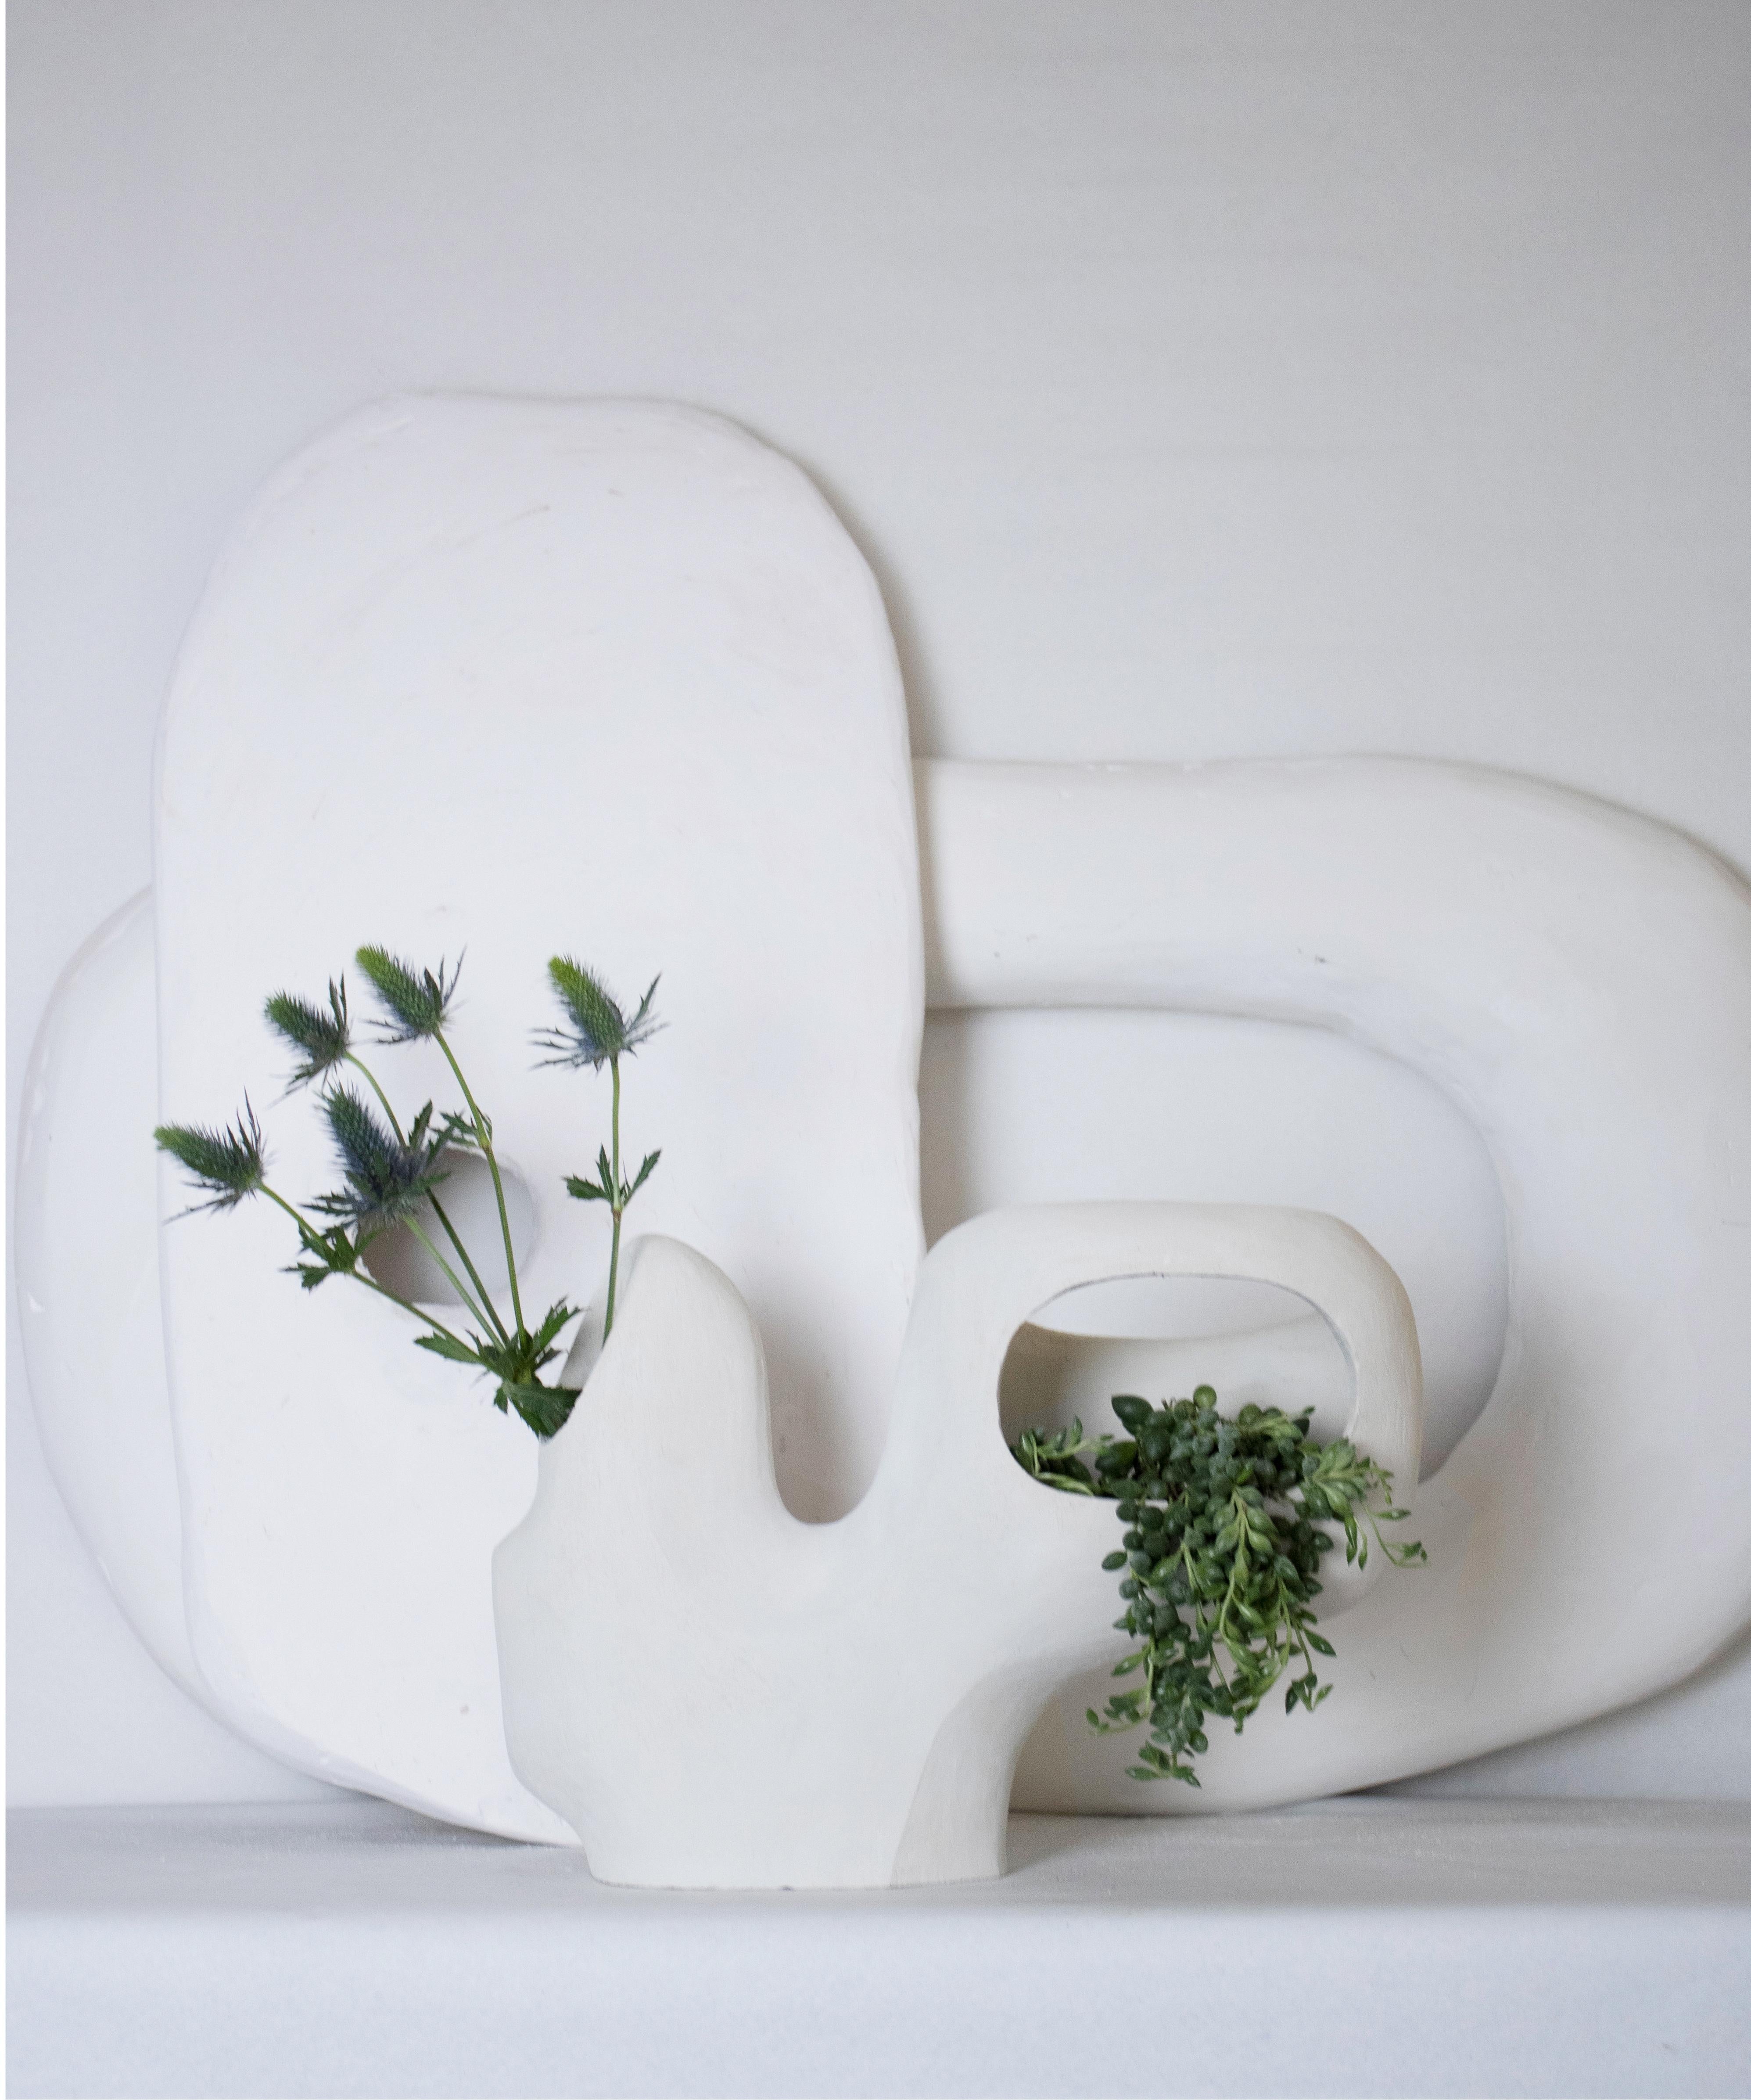 Vase No_05 is a handmade ceramic ikebana vase part of the Kado Collection “way of flowers”. All elements are the result of experimenting between the shape and the various possibilities of plant arrangement. We drew inspiration from the traditional